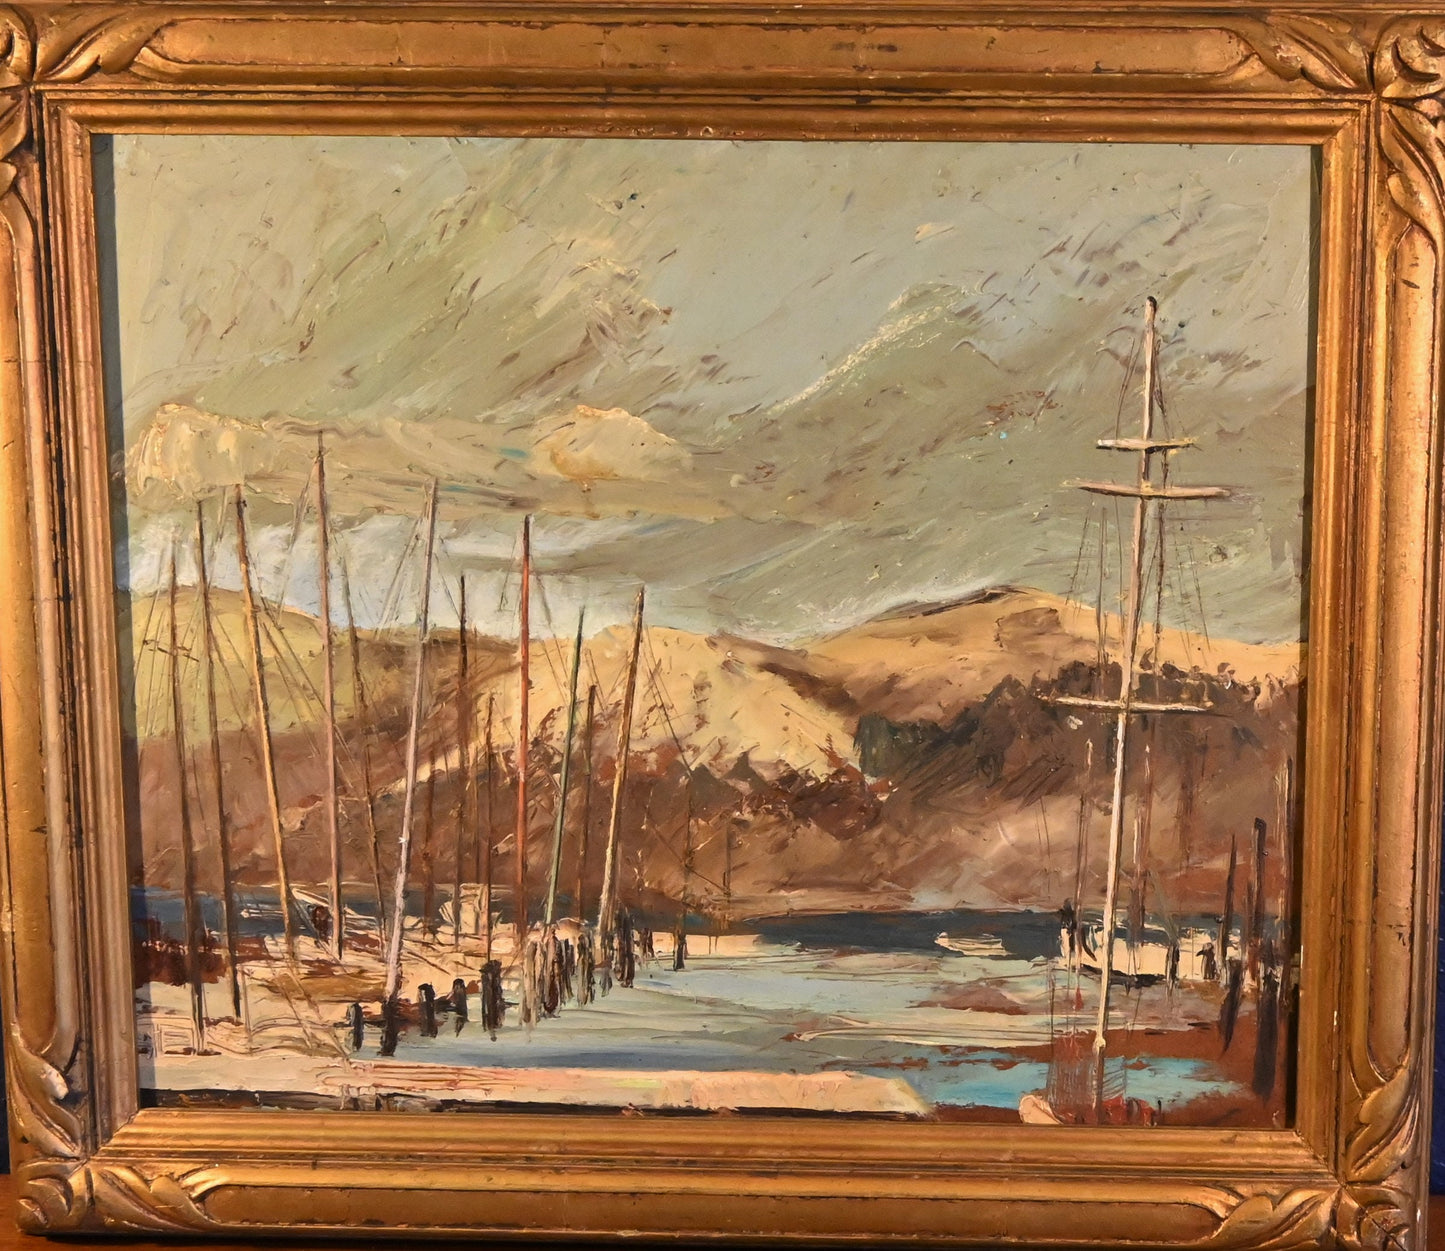 Gorgeous California Harbor Scene, Early 20th Century Impressionist Oil Painting - needs research -24.75 X 28.5 inches- Masterfully executed